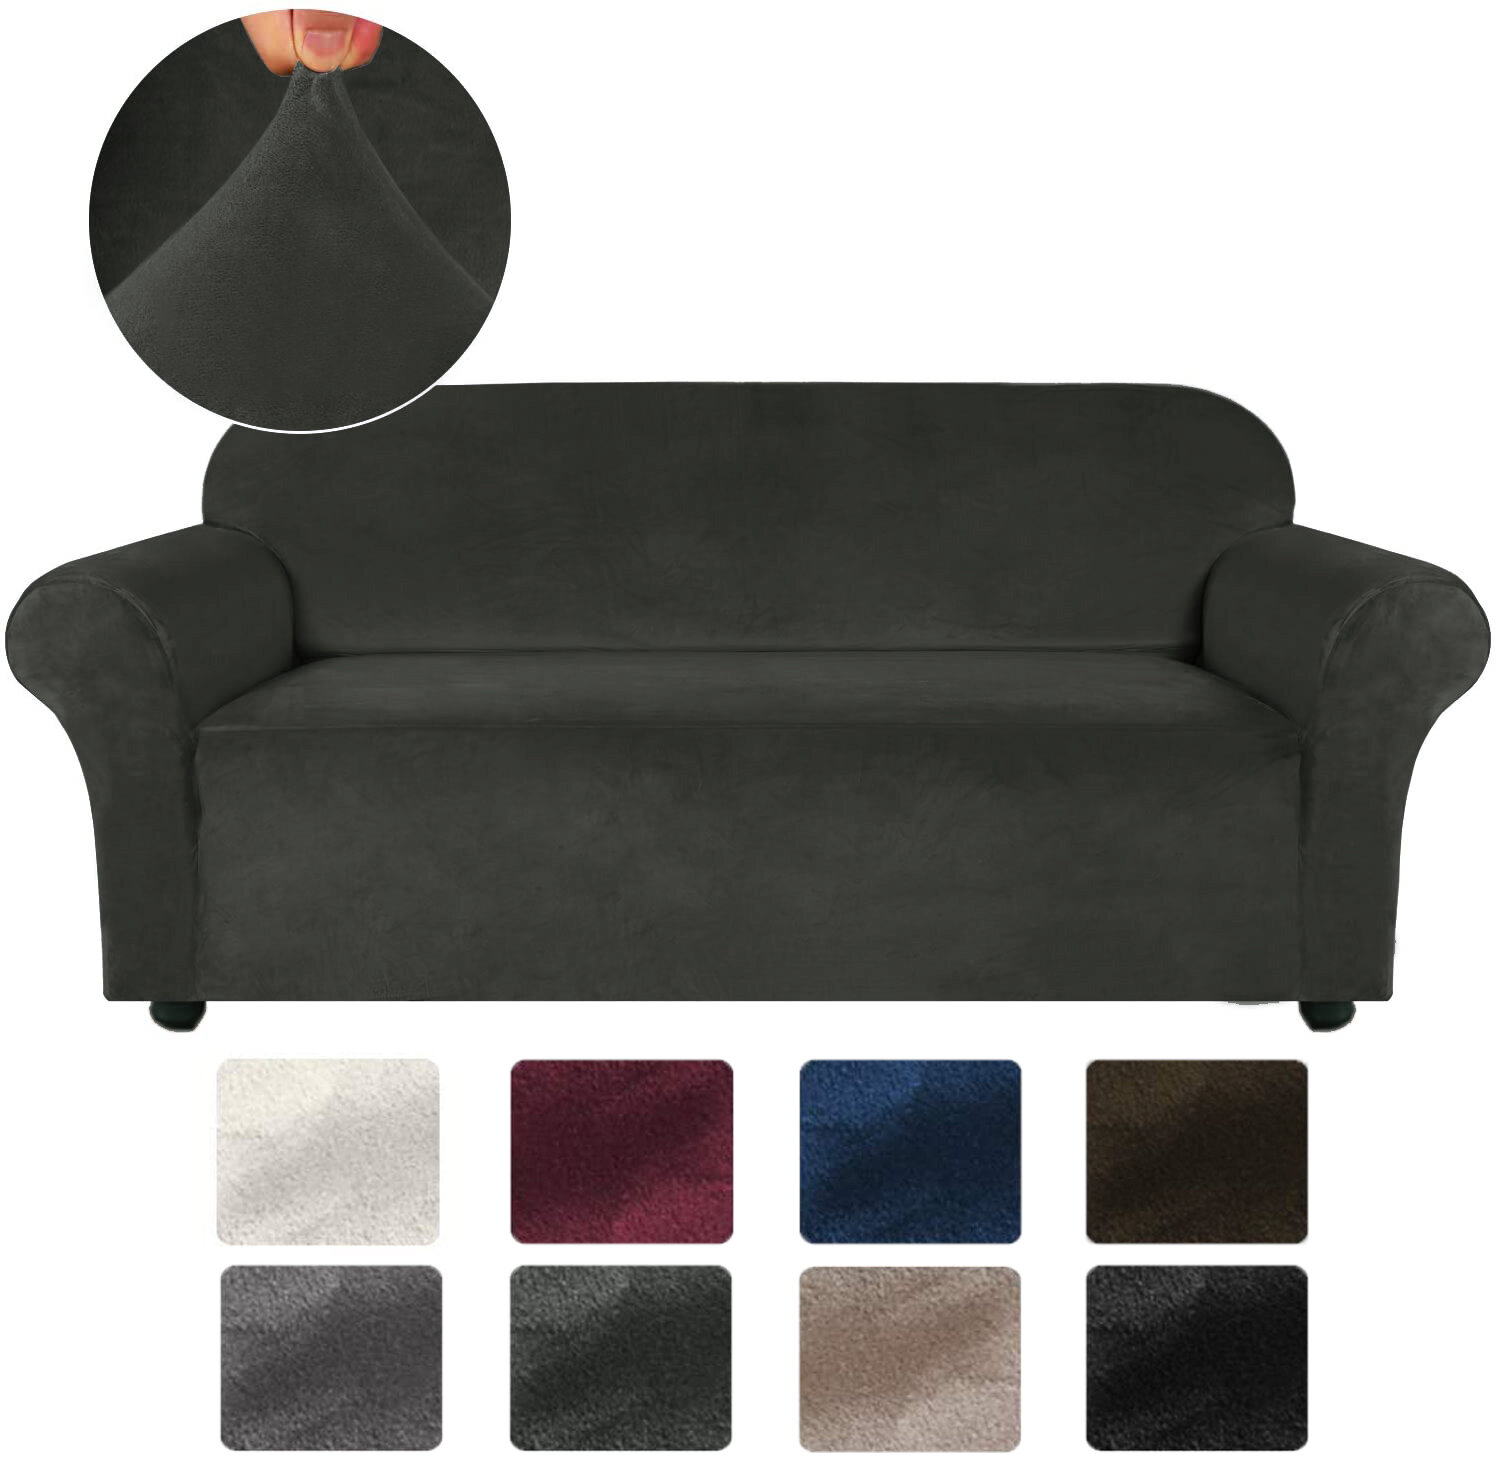 Image of 4 Seater Velvet Sofa Cover Solid Colour Thickened Plush Anti-slip Super Soft Sofa Protector Home Chair Cover